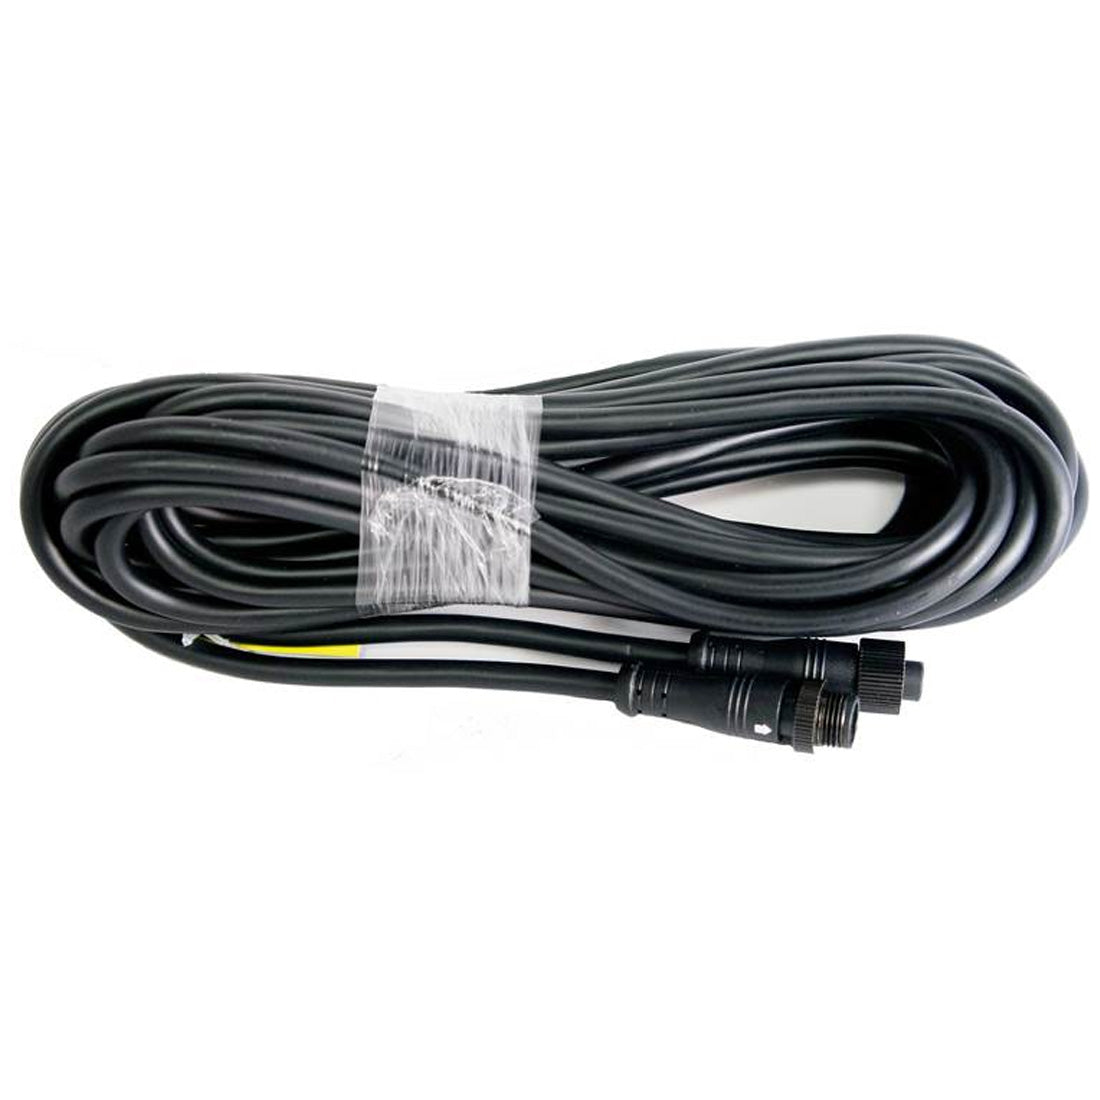 Kicker KRCEXT25 25-Foot Cable for Kicker KRC55 Remotes